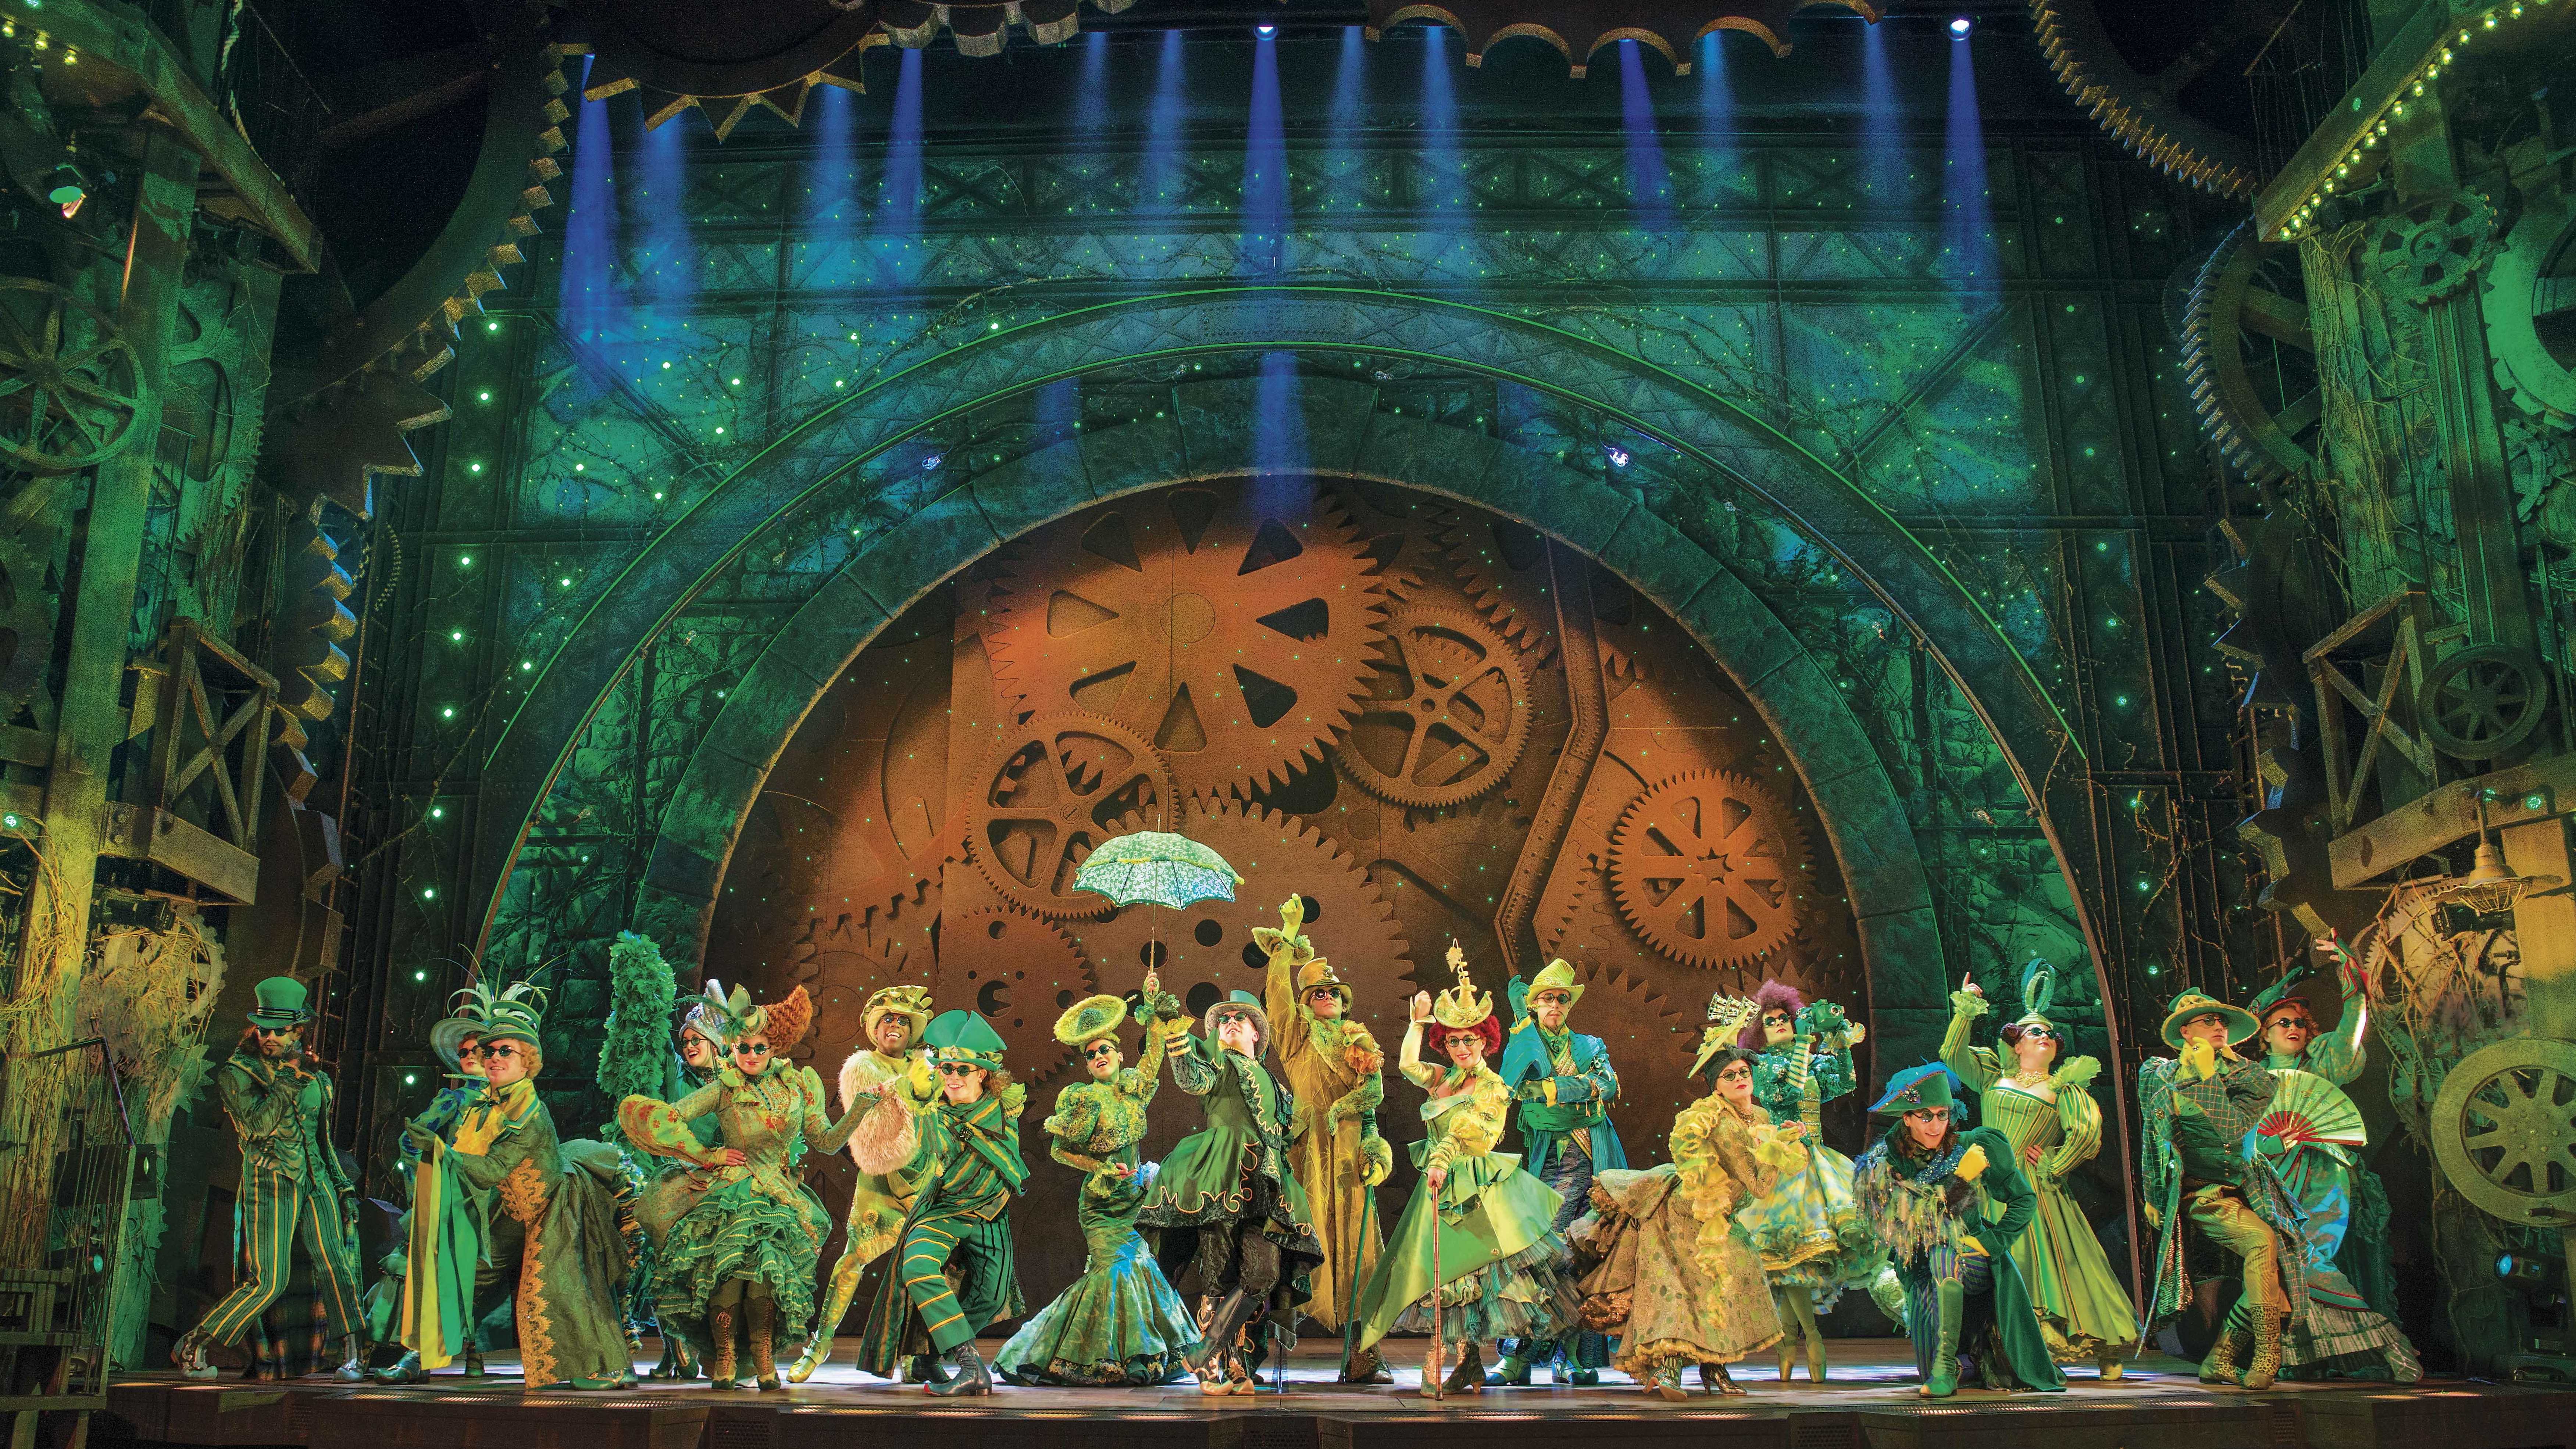 Top 10 Musicals To Take the Kids To - Heart